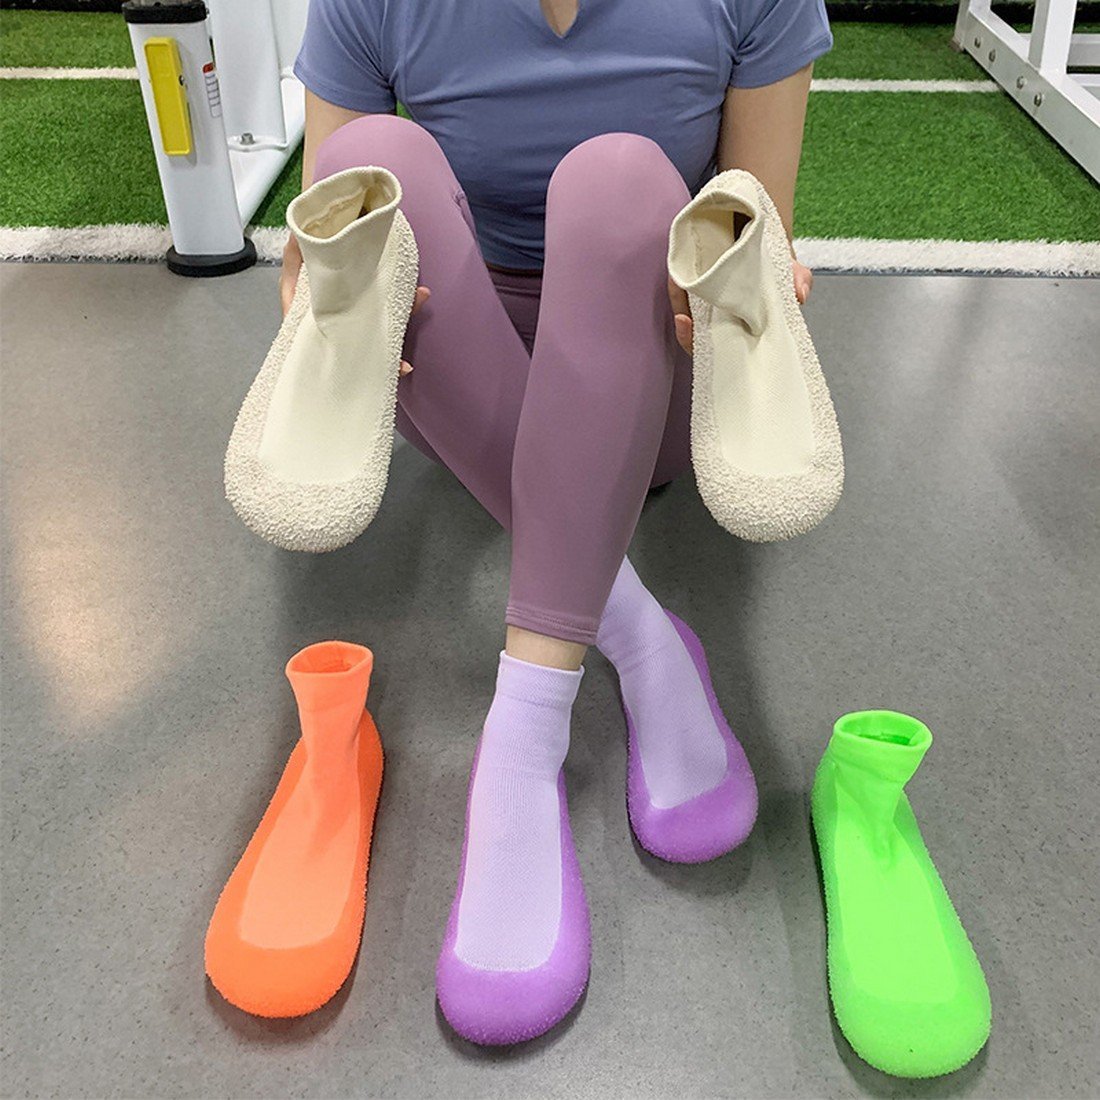  socks shoes fluorescence color slip prevention soft ventilation light weight elasticity socks room shoes interior outdoors combined use 23.5cm purple 